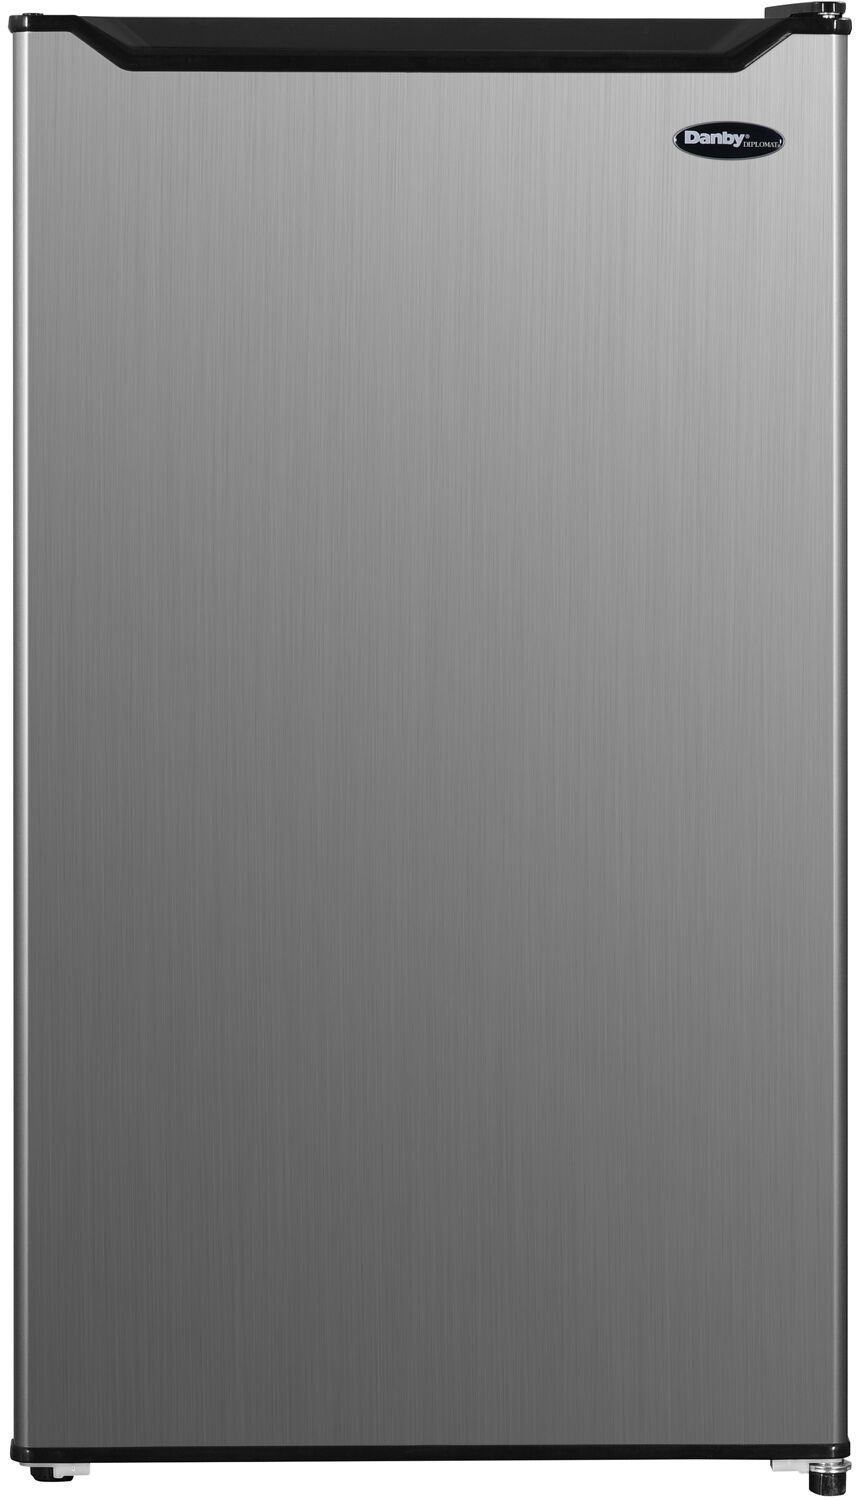 Danby® Diplomat® 3.2 Cu. Ft. Black Stainless Steel Compact Refrigerator